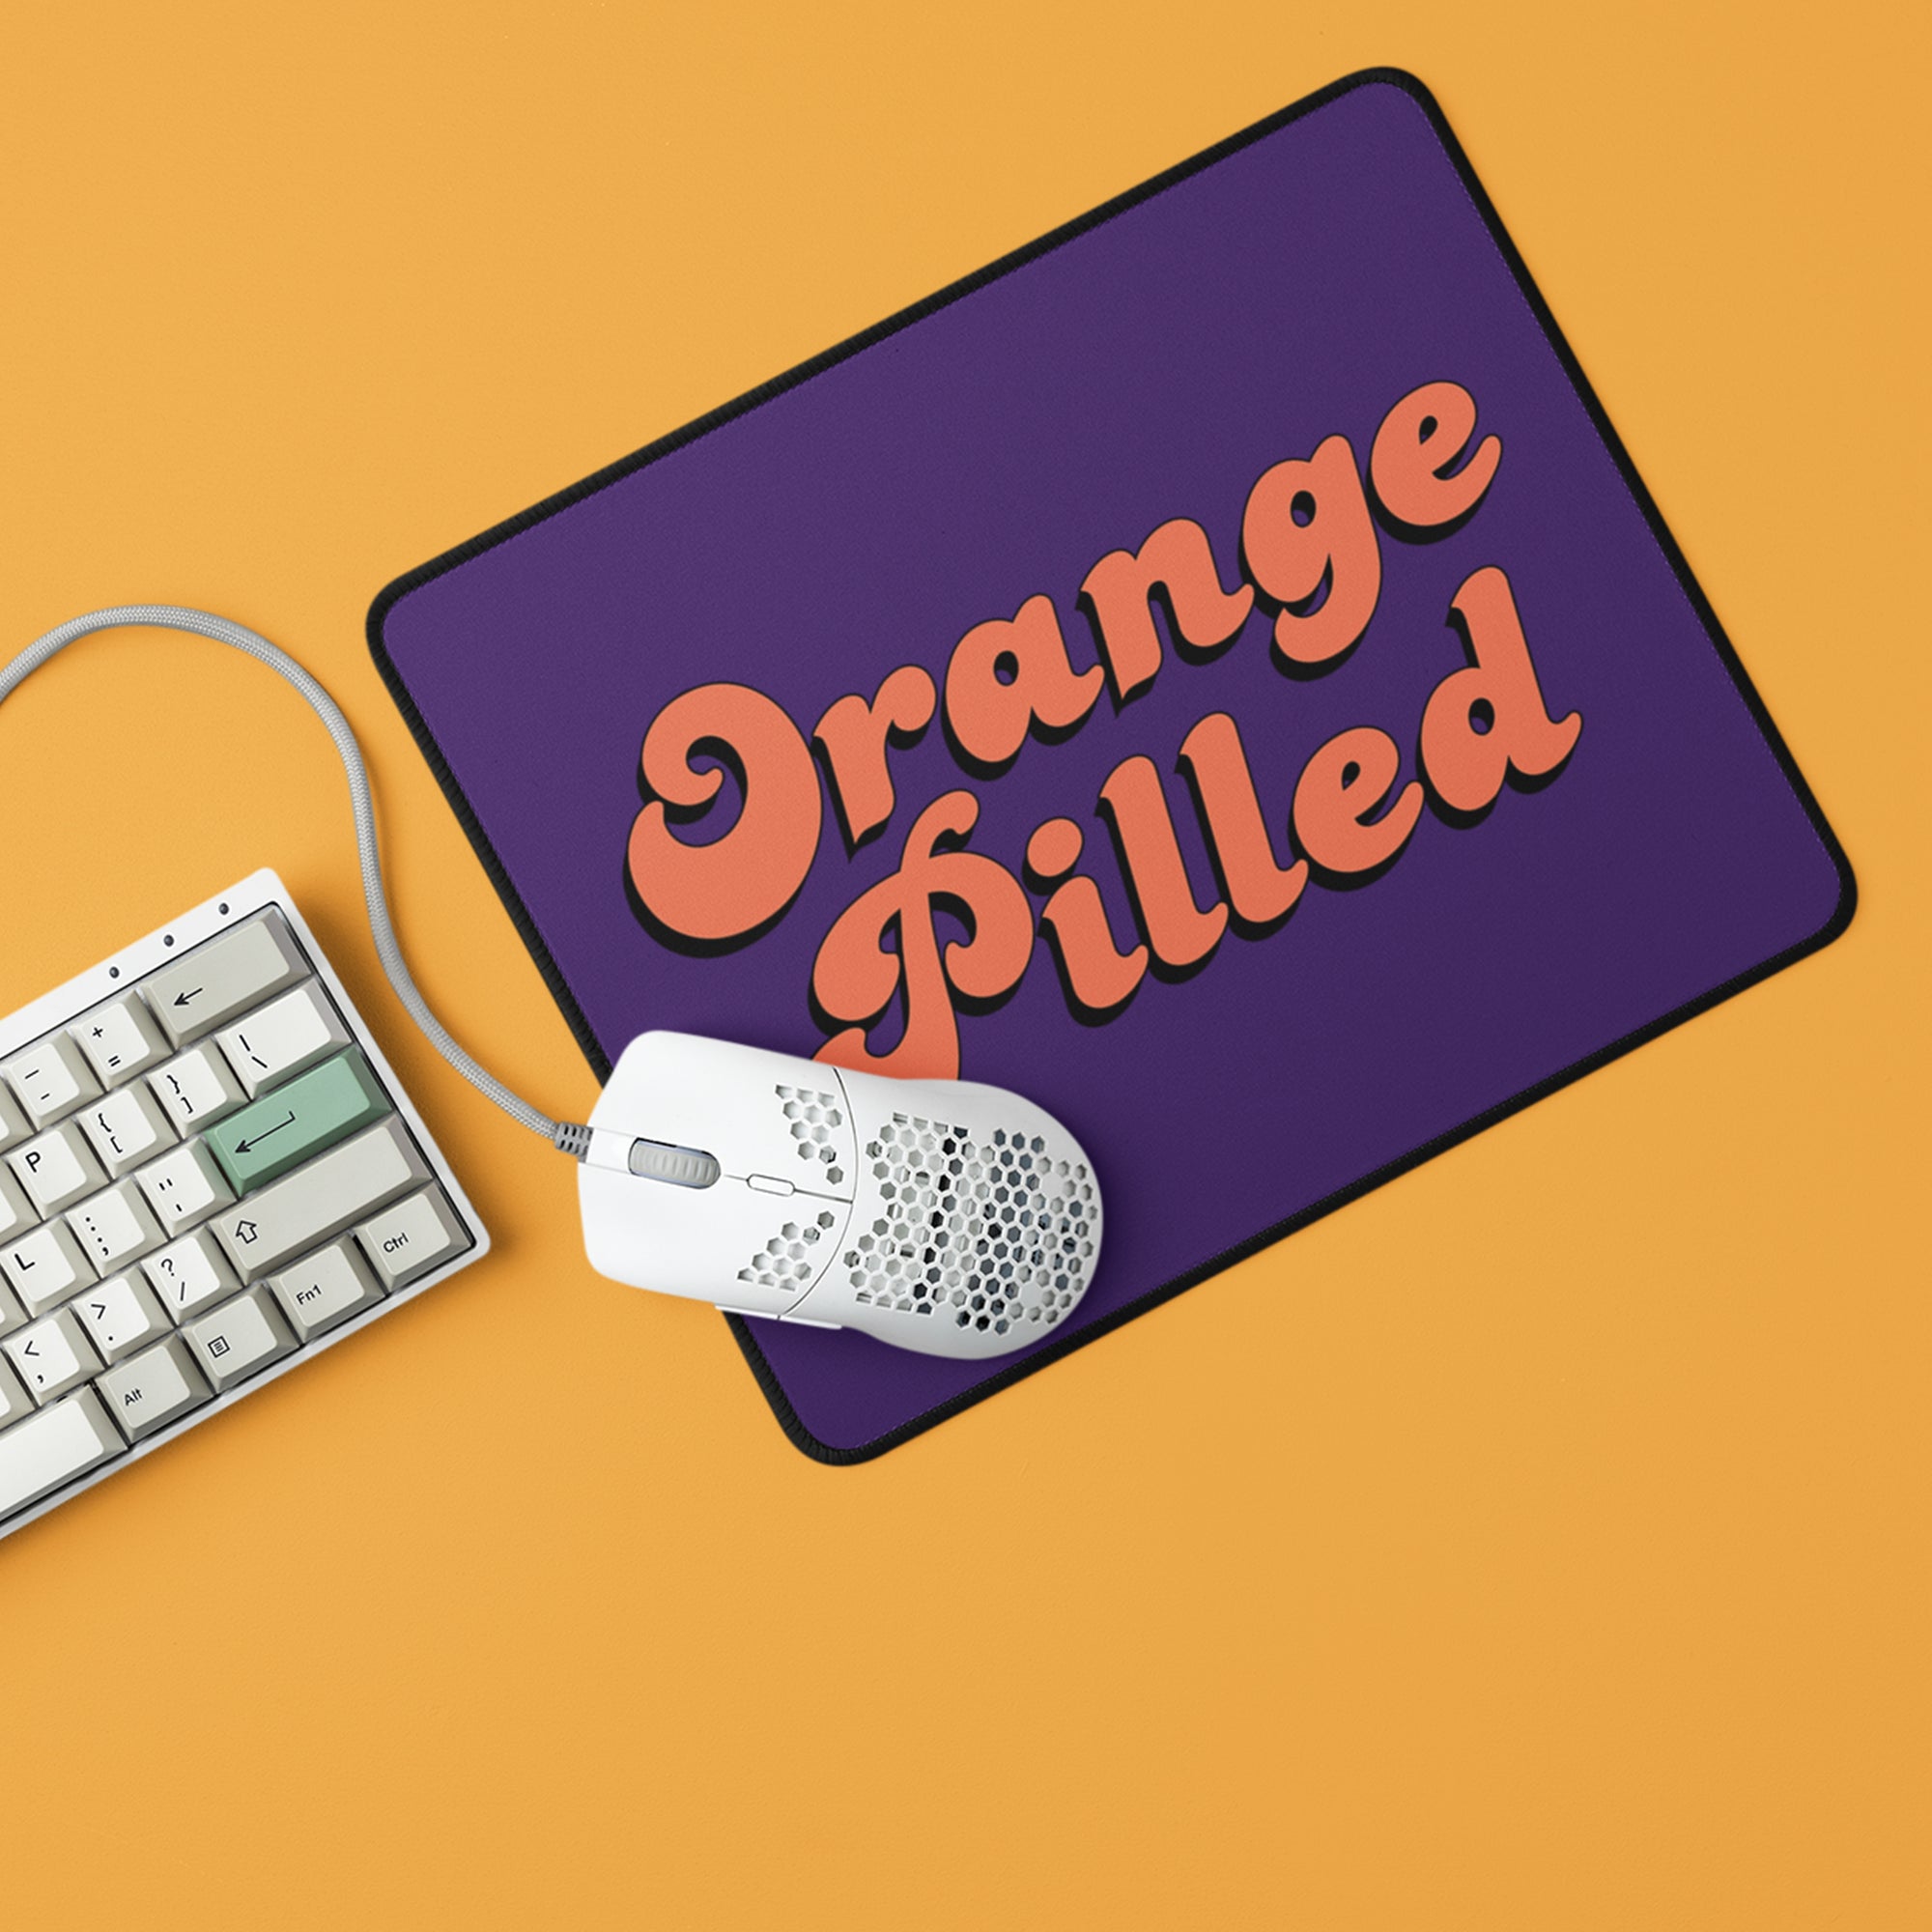 Bitcoin Accessories - Orange Pilled Mouse Pad displayed with keyboard and mouse.